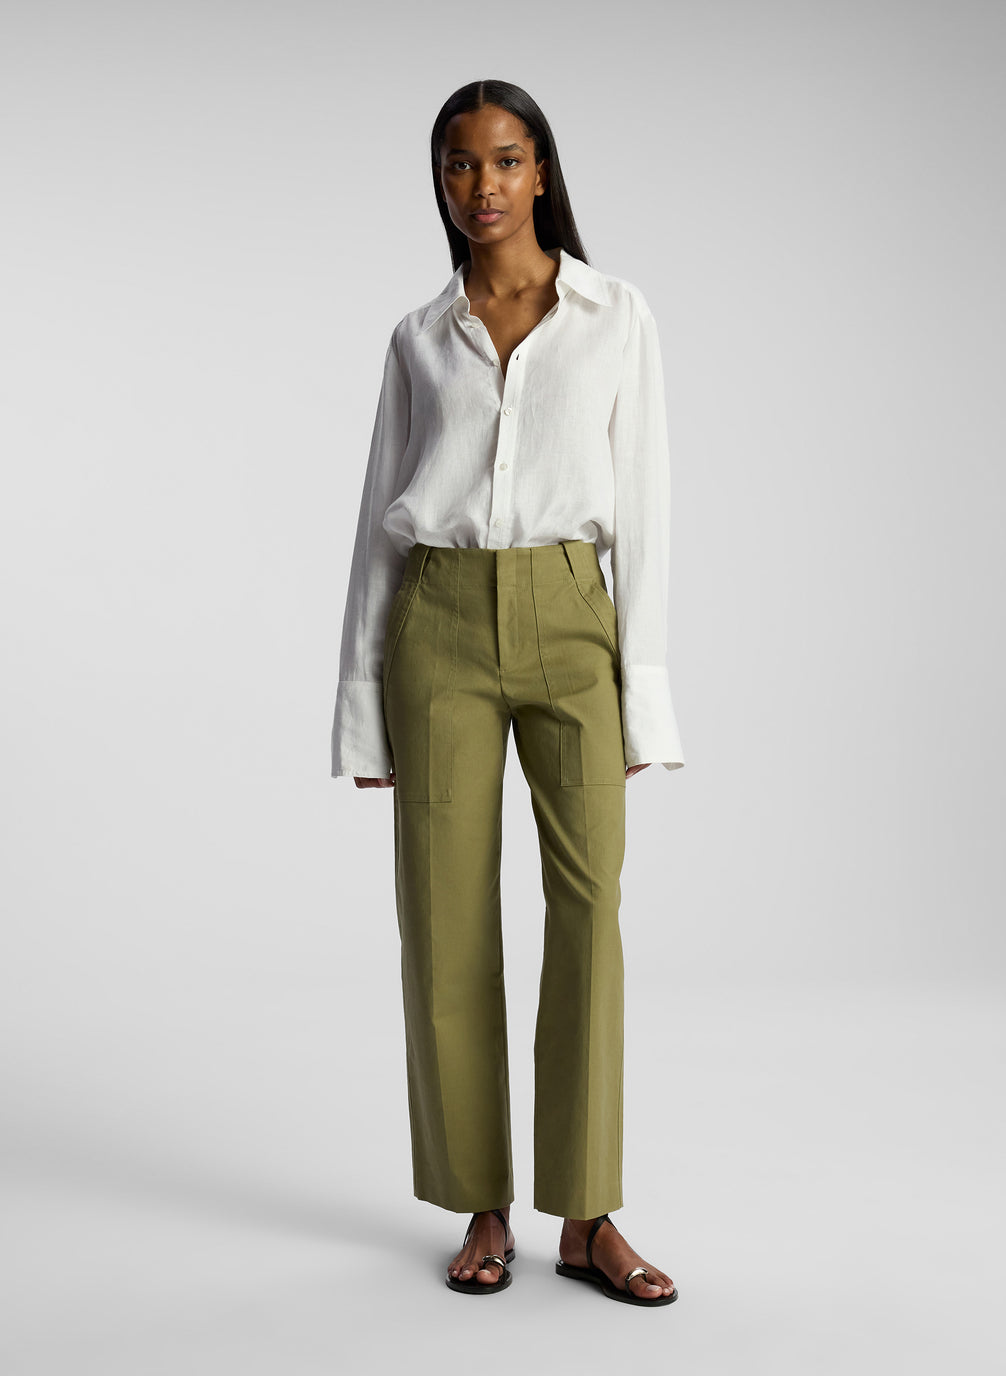 front view of woman wearing white button down shirt and olive pants